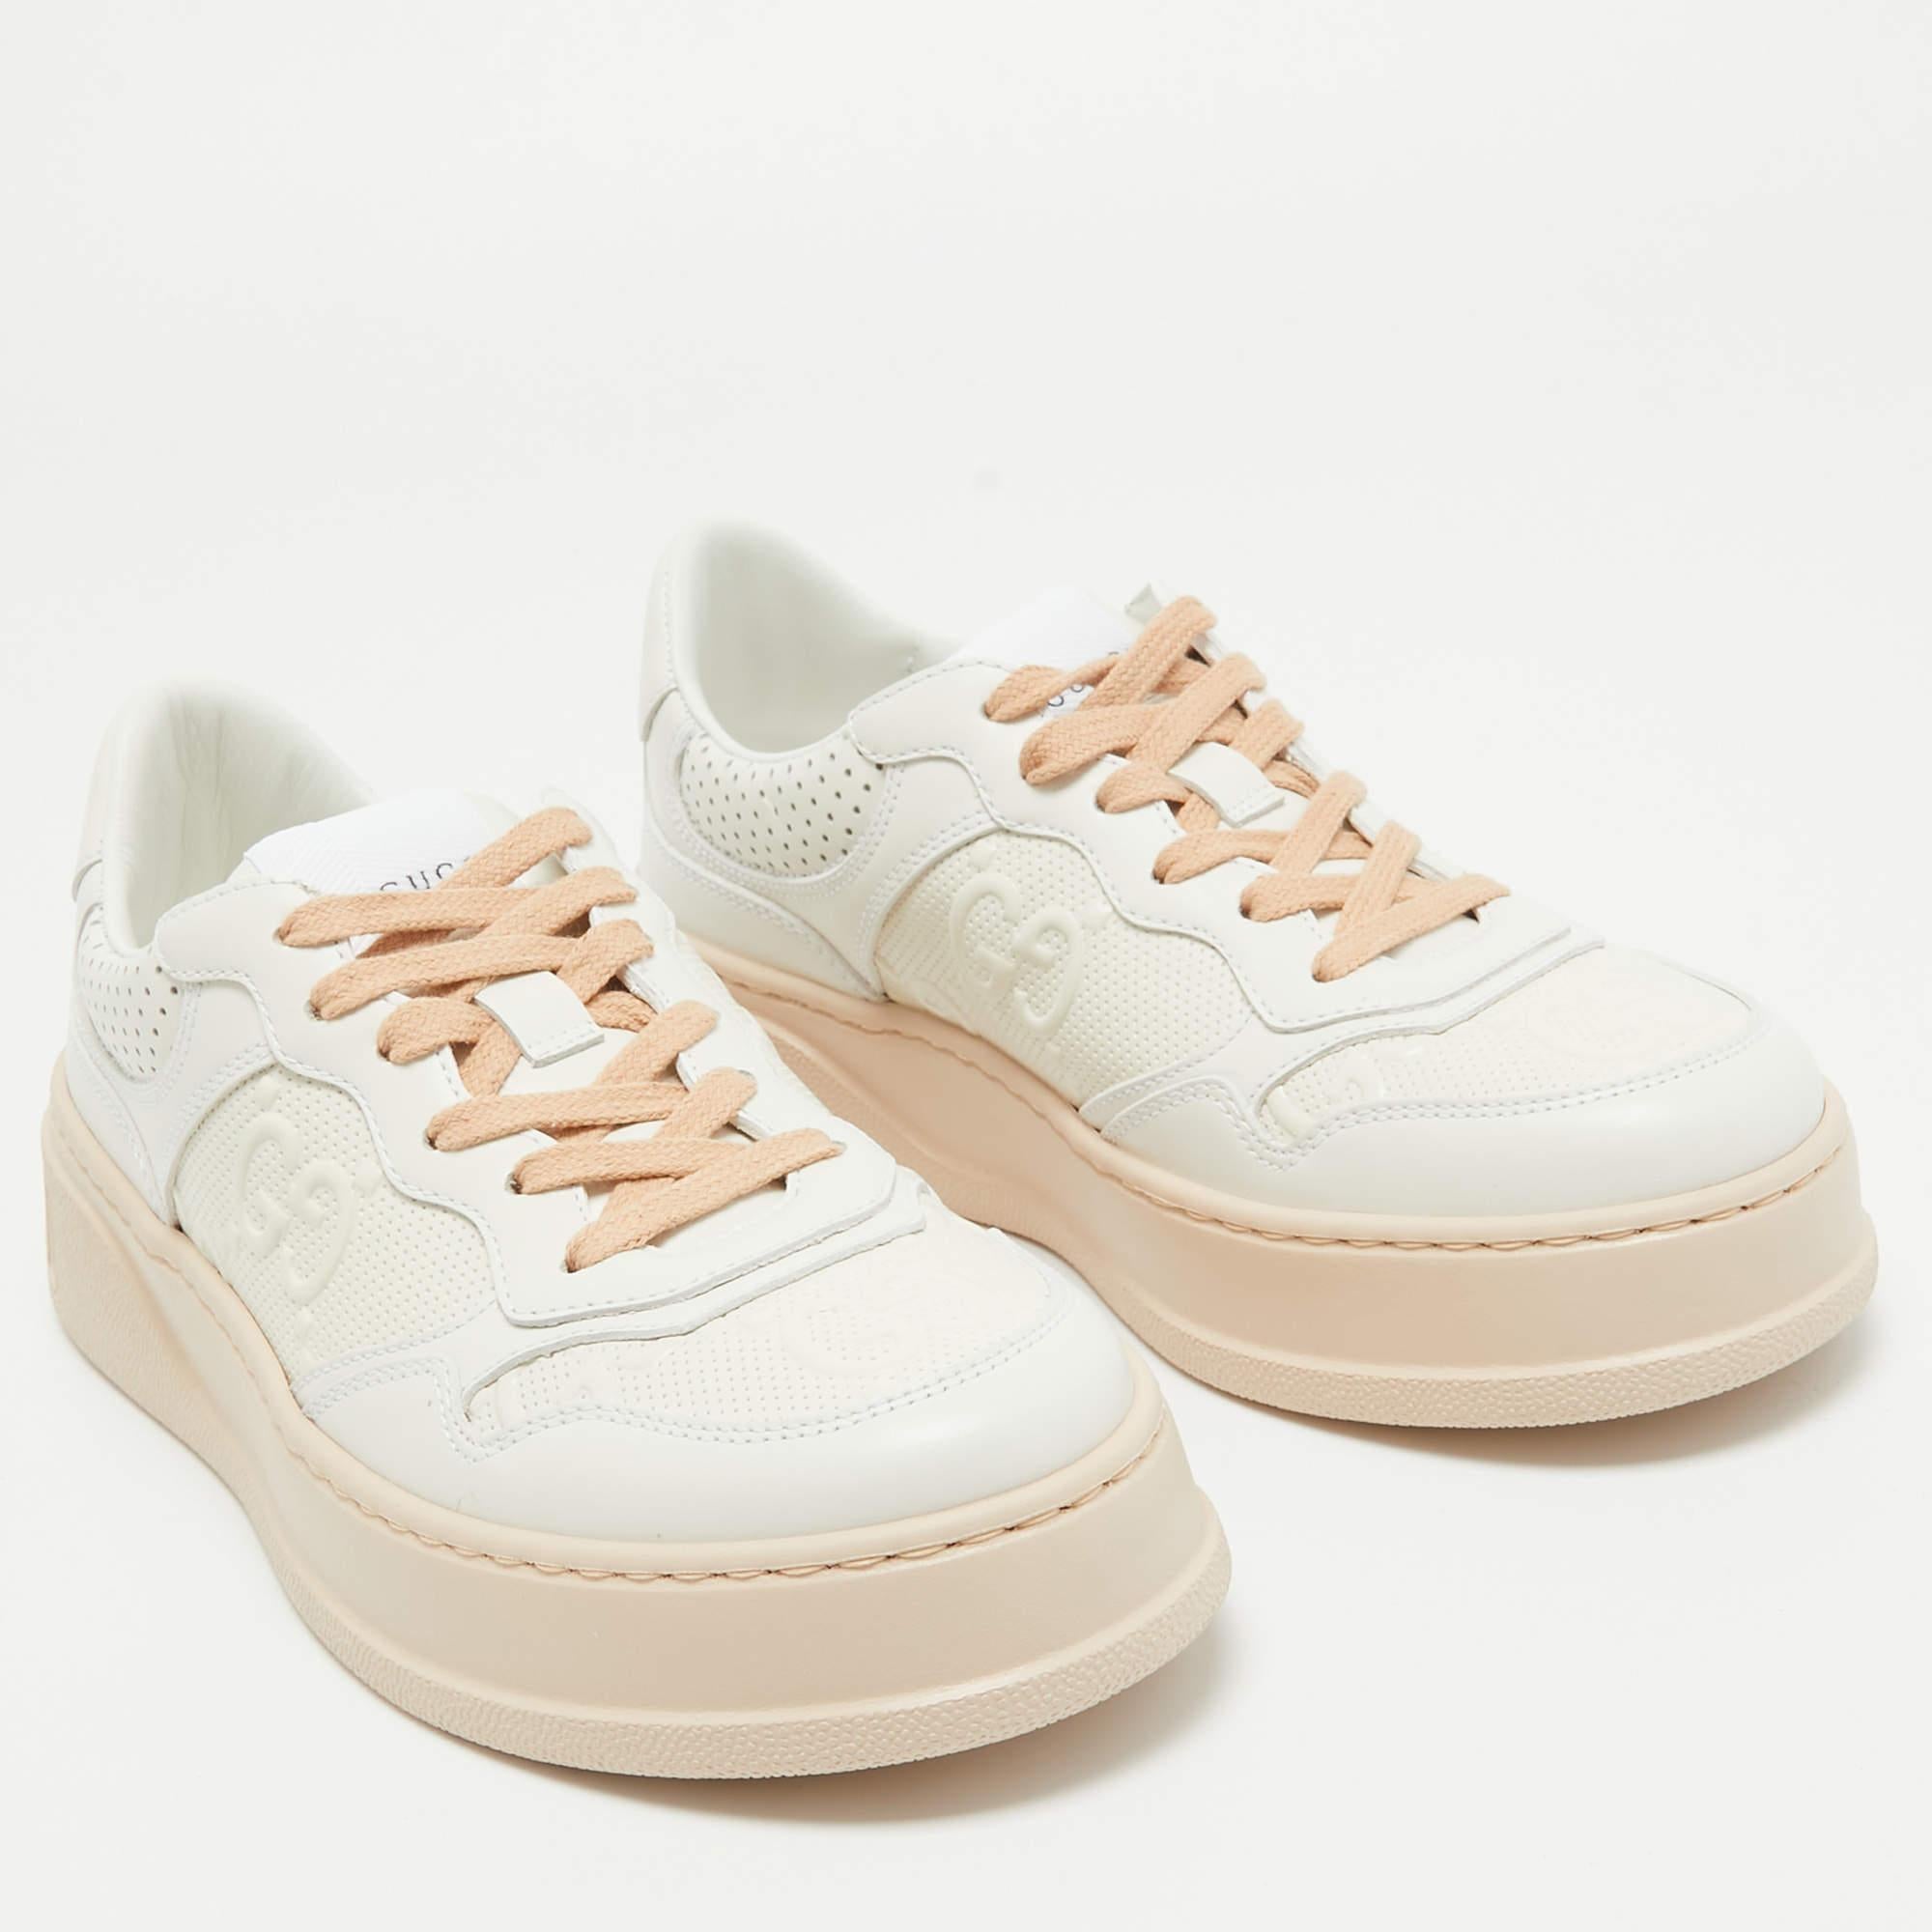 Gucci White GG Embossed Leather Low Top Sneakers Size 37 1